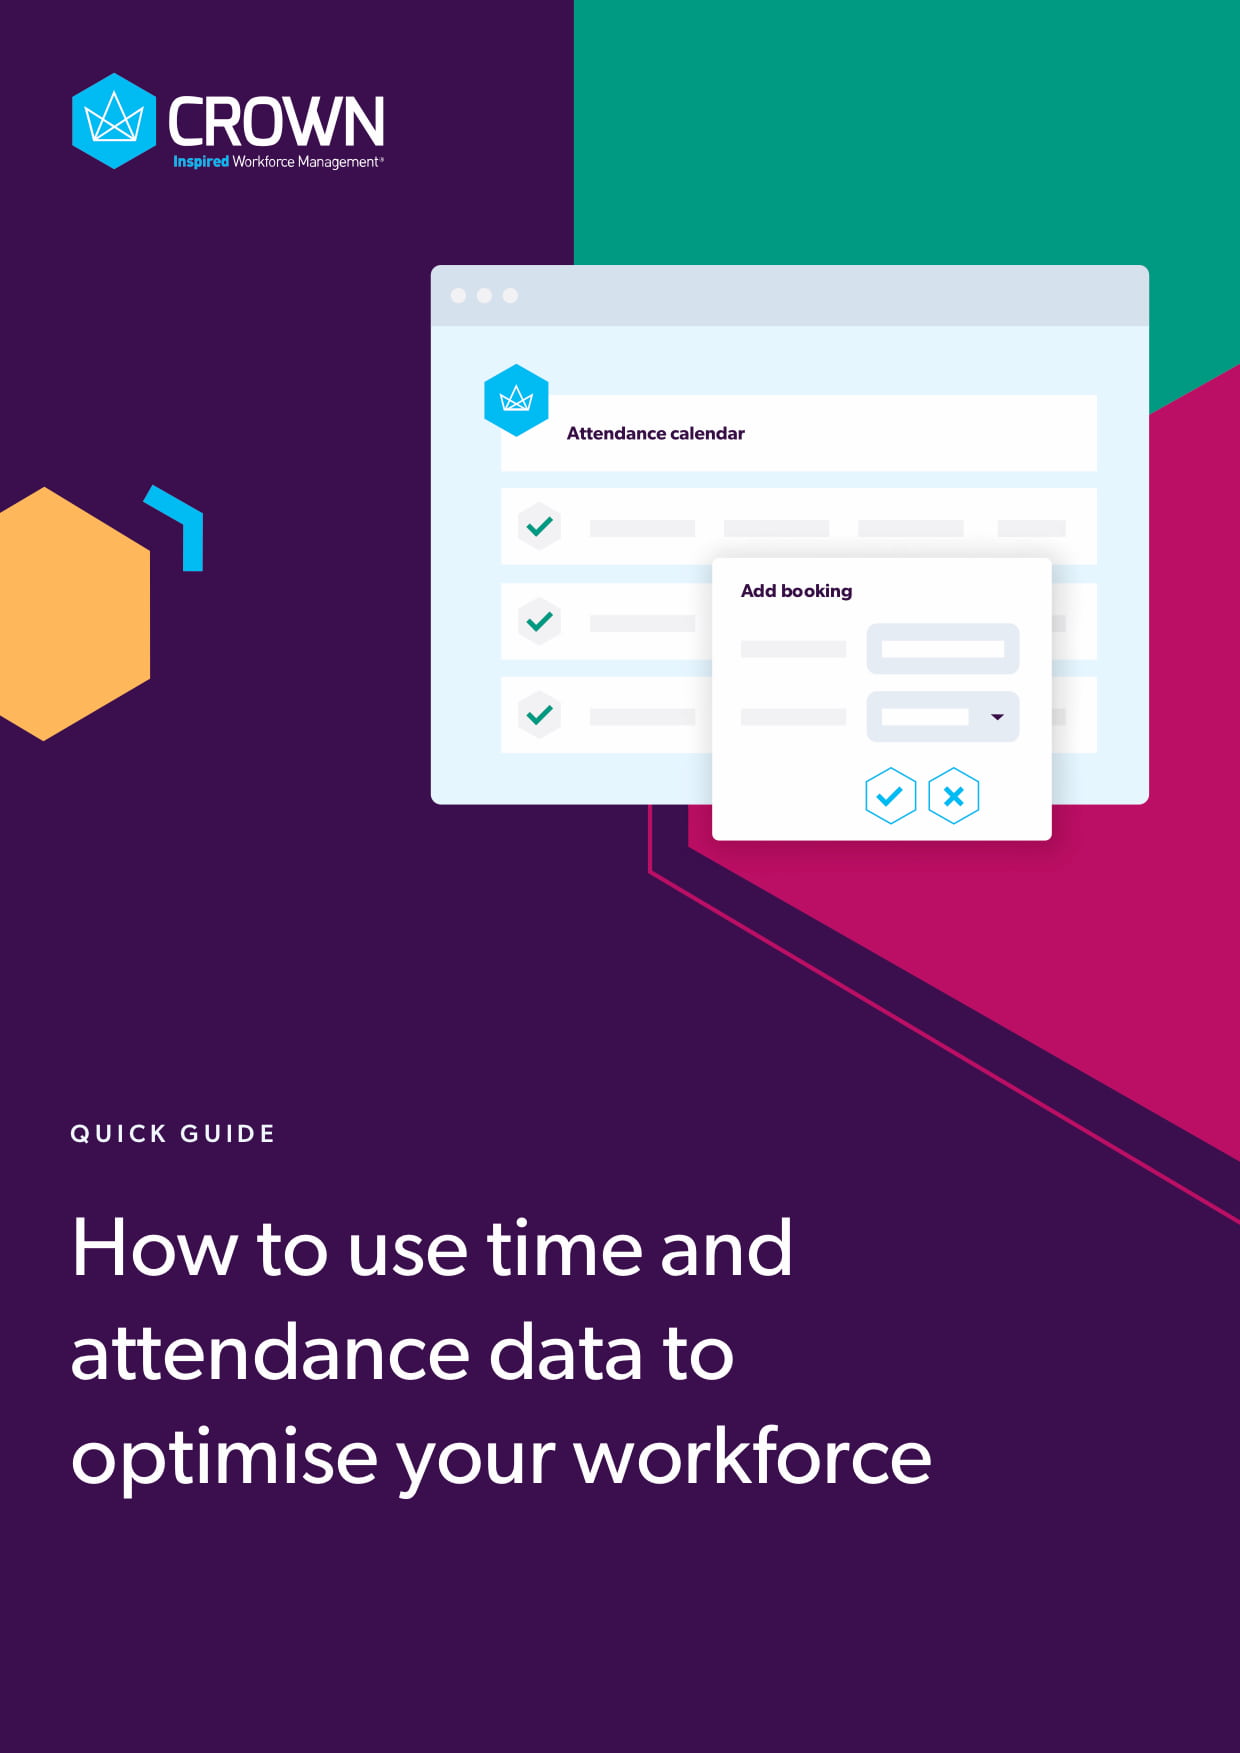 How to use time and attendance data to optimise your workforce